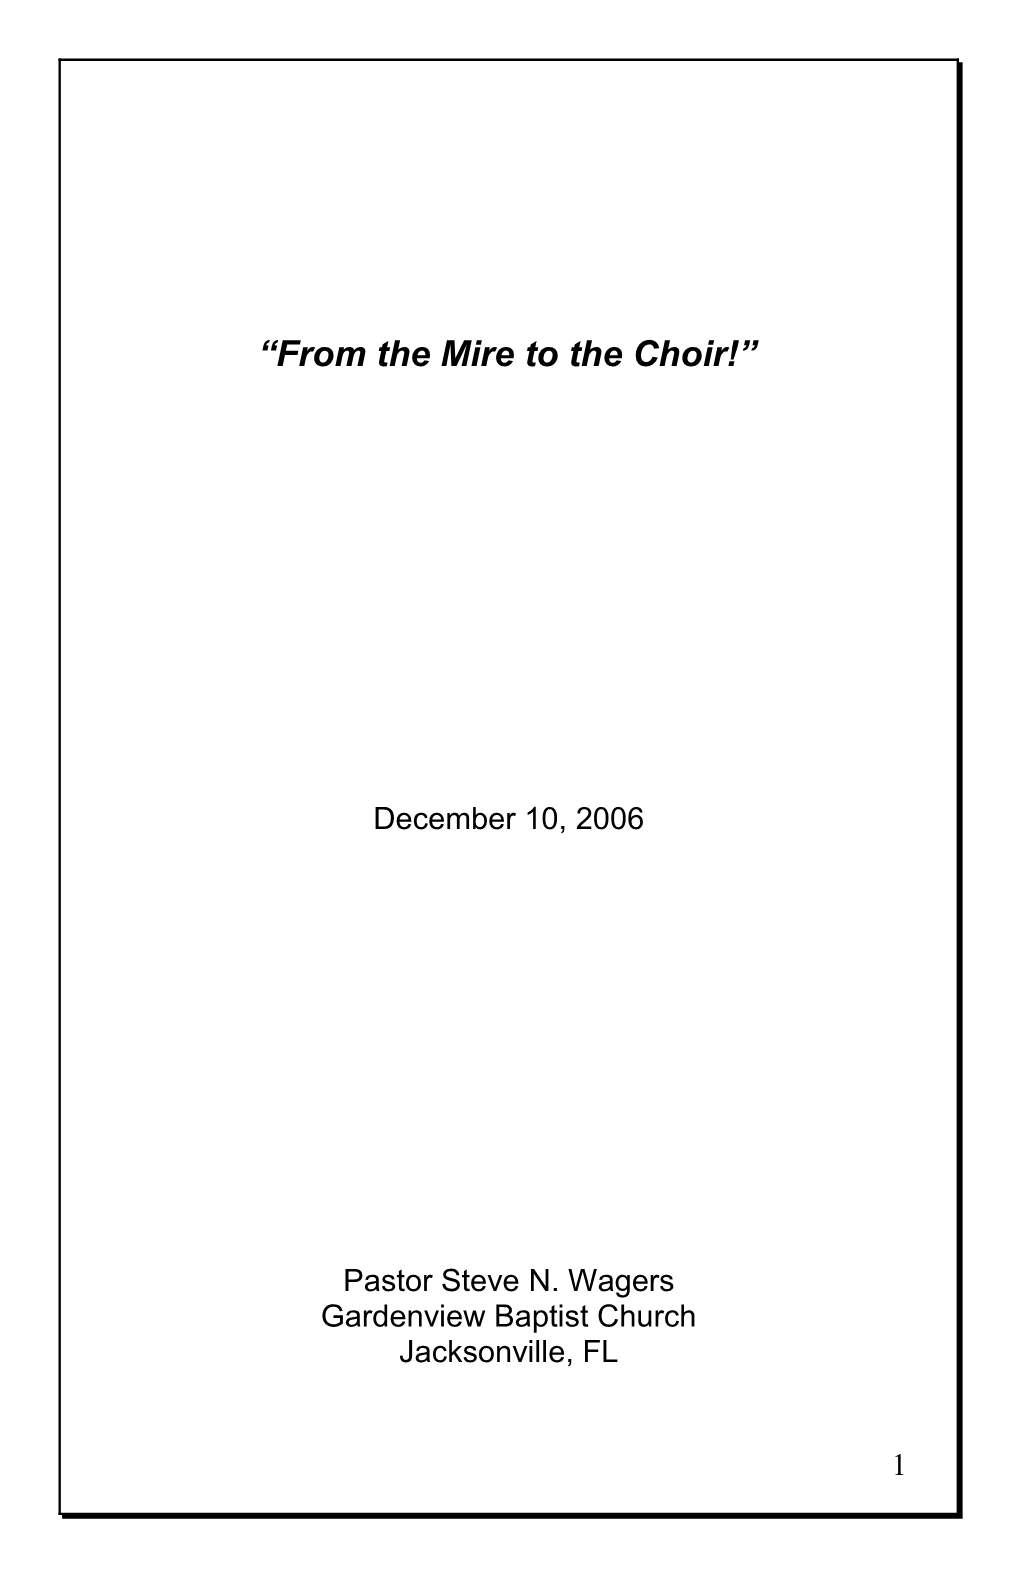 From the Mire to the Choir!